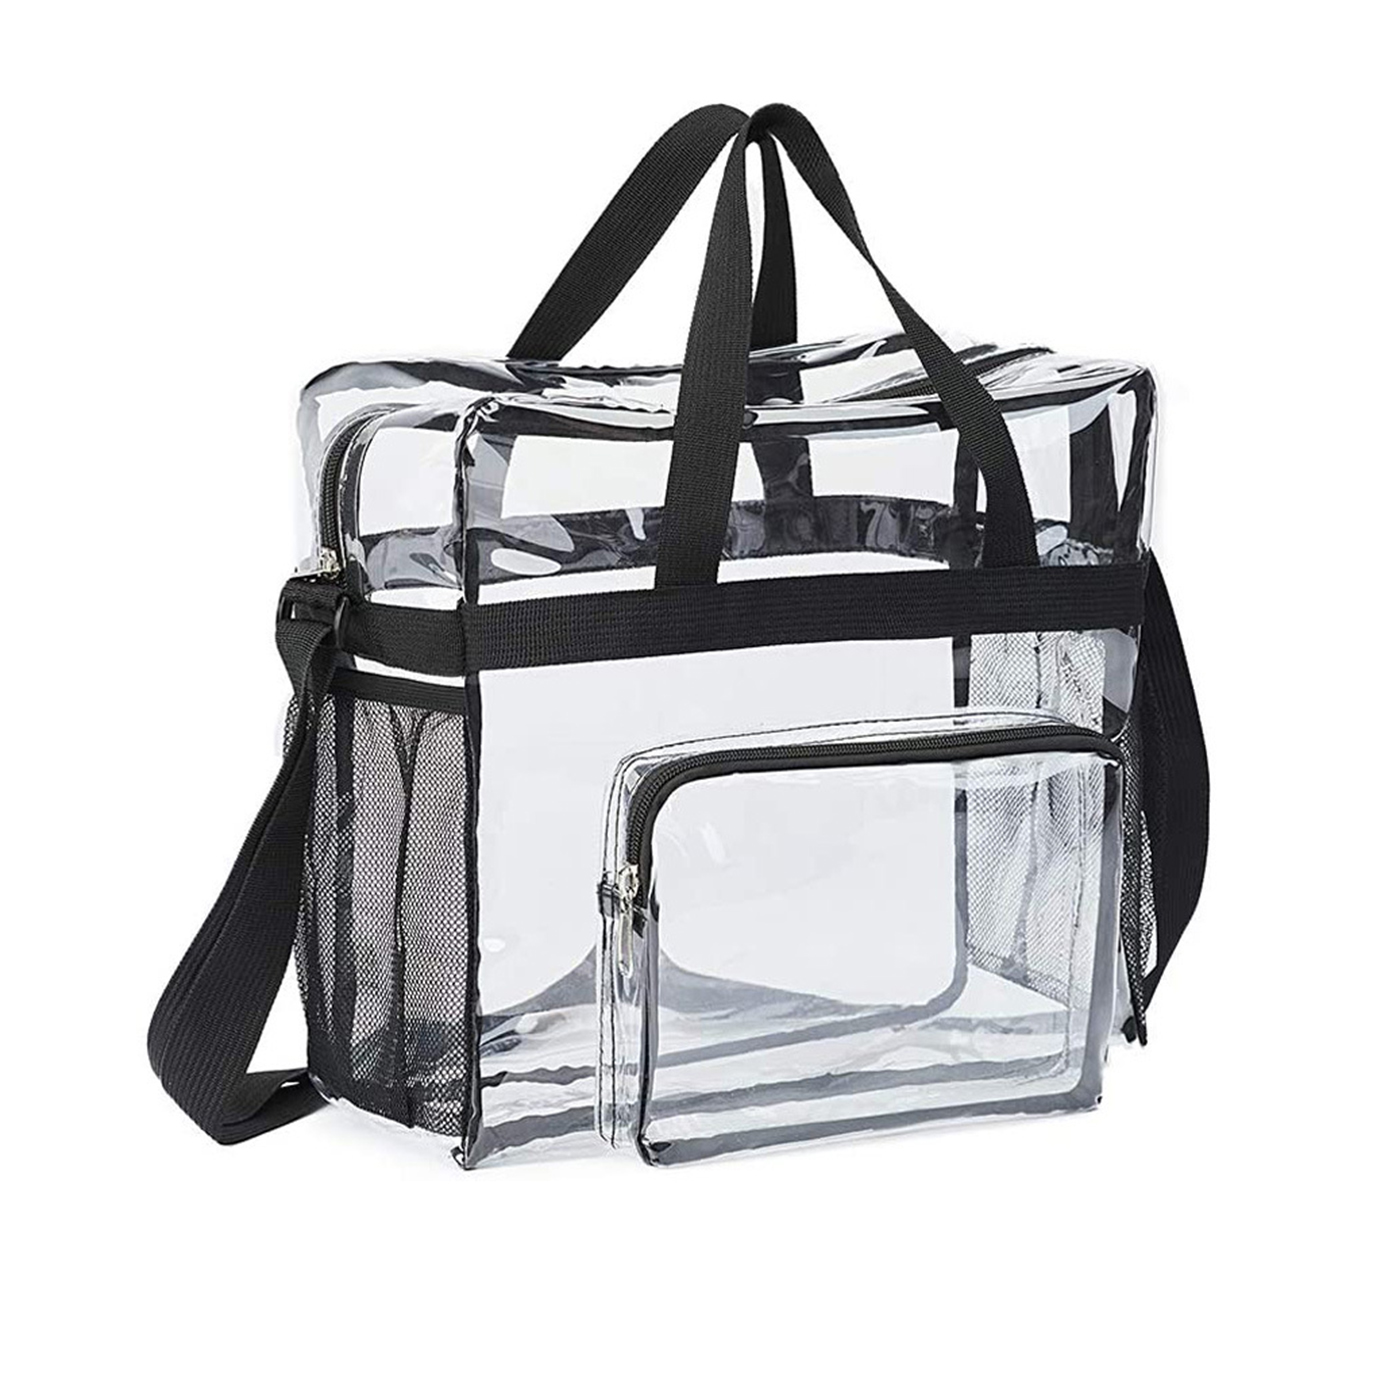 Large Capacity Clear Bag With Shoulder Strap2